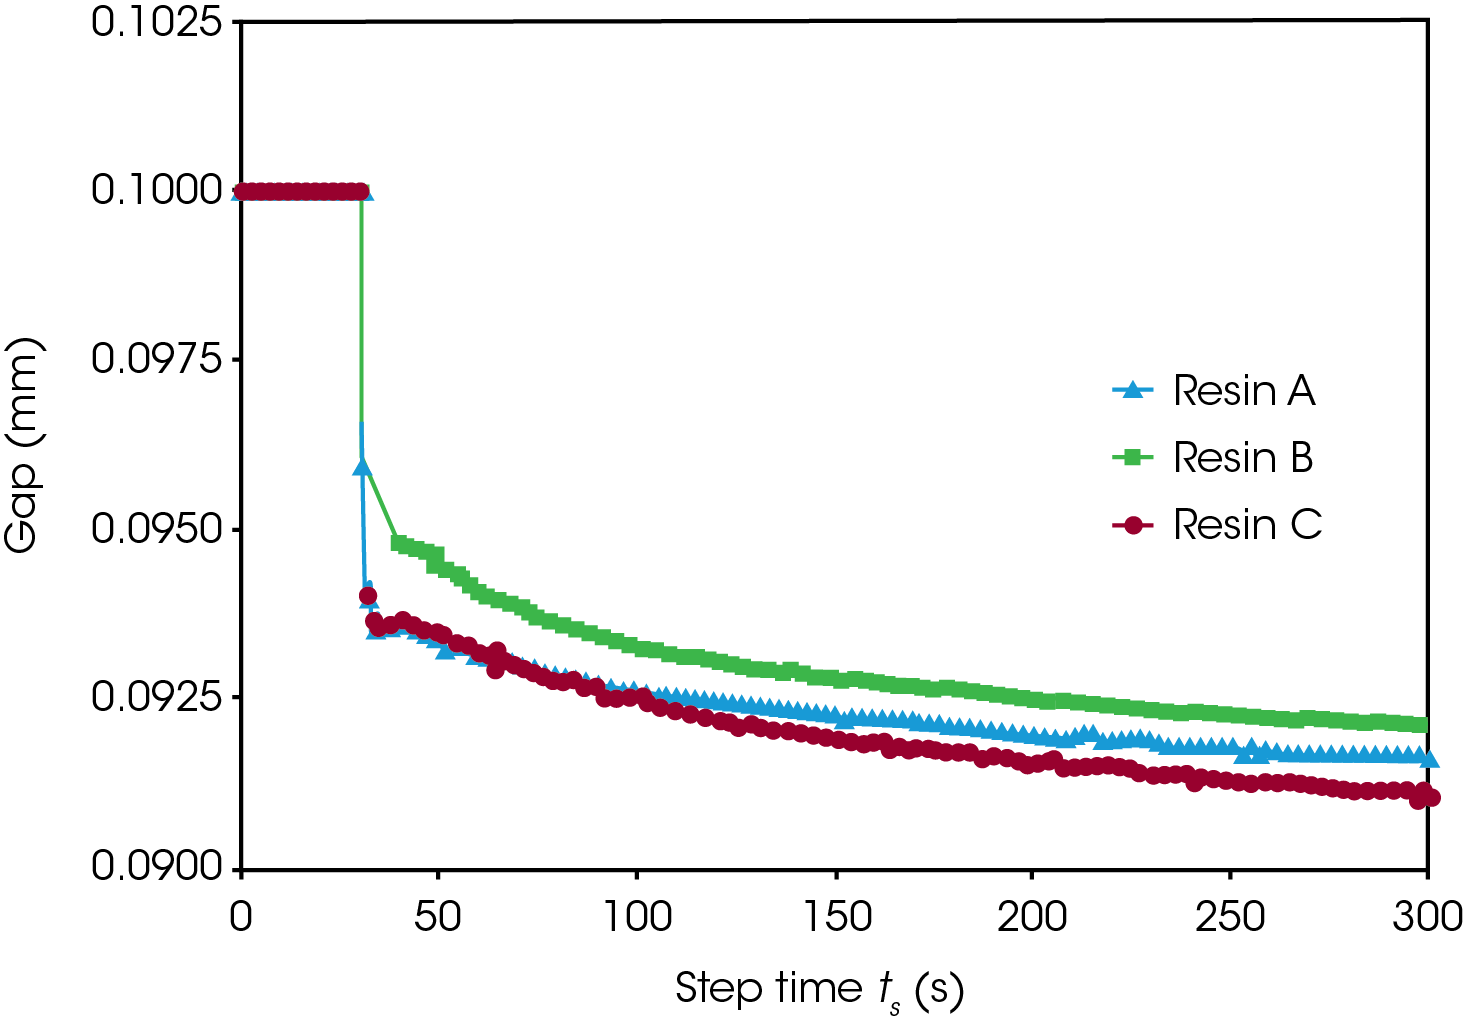 Figure 5. Same oscillatory time sweep experiment as in figure 4. Plate gap is plotted as a function of time for the three resins, with initial gap of 100µm. There is a 0.5% variation of shrinkage between each resin at the final measured point.